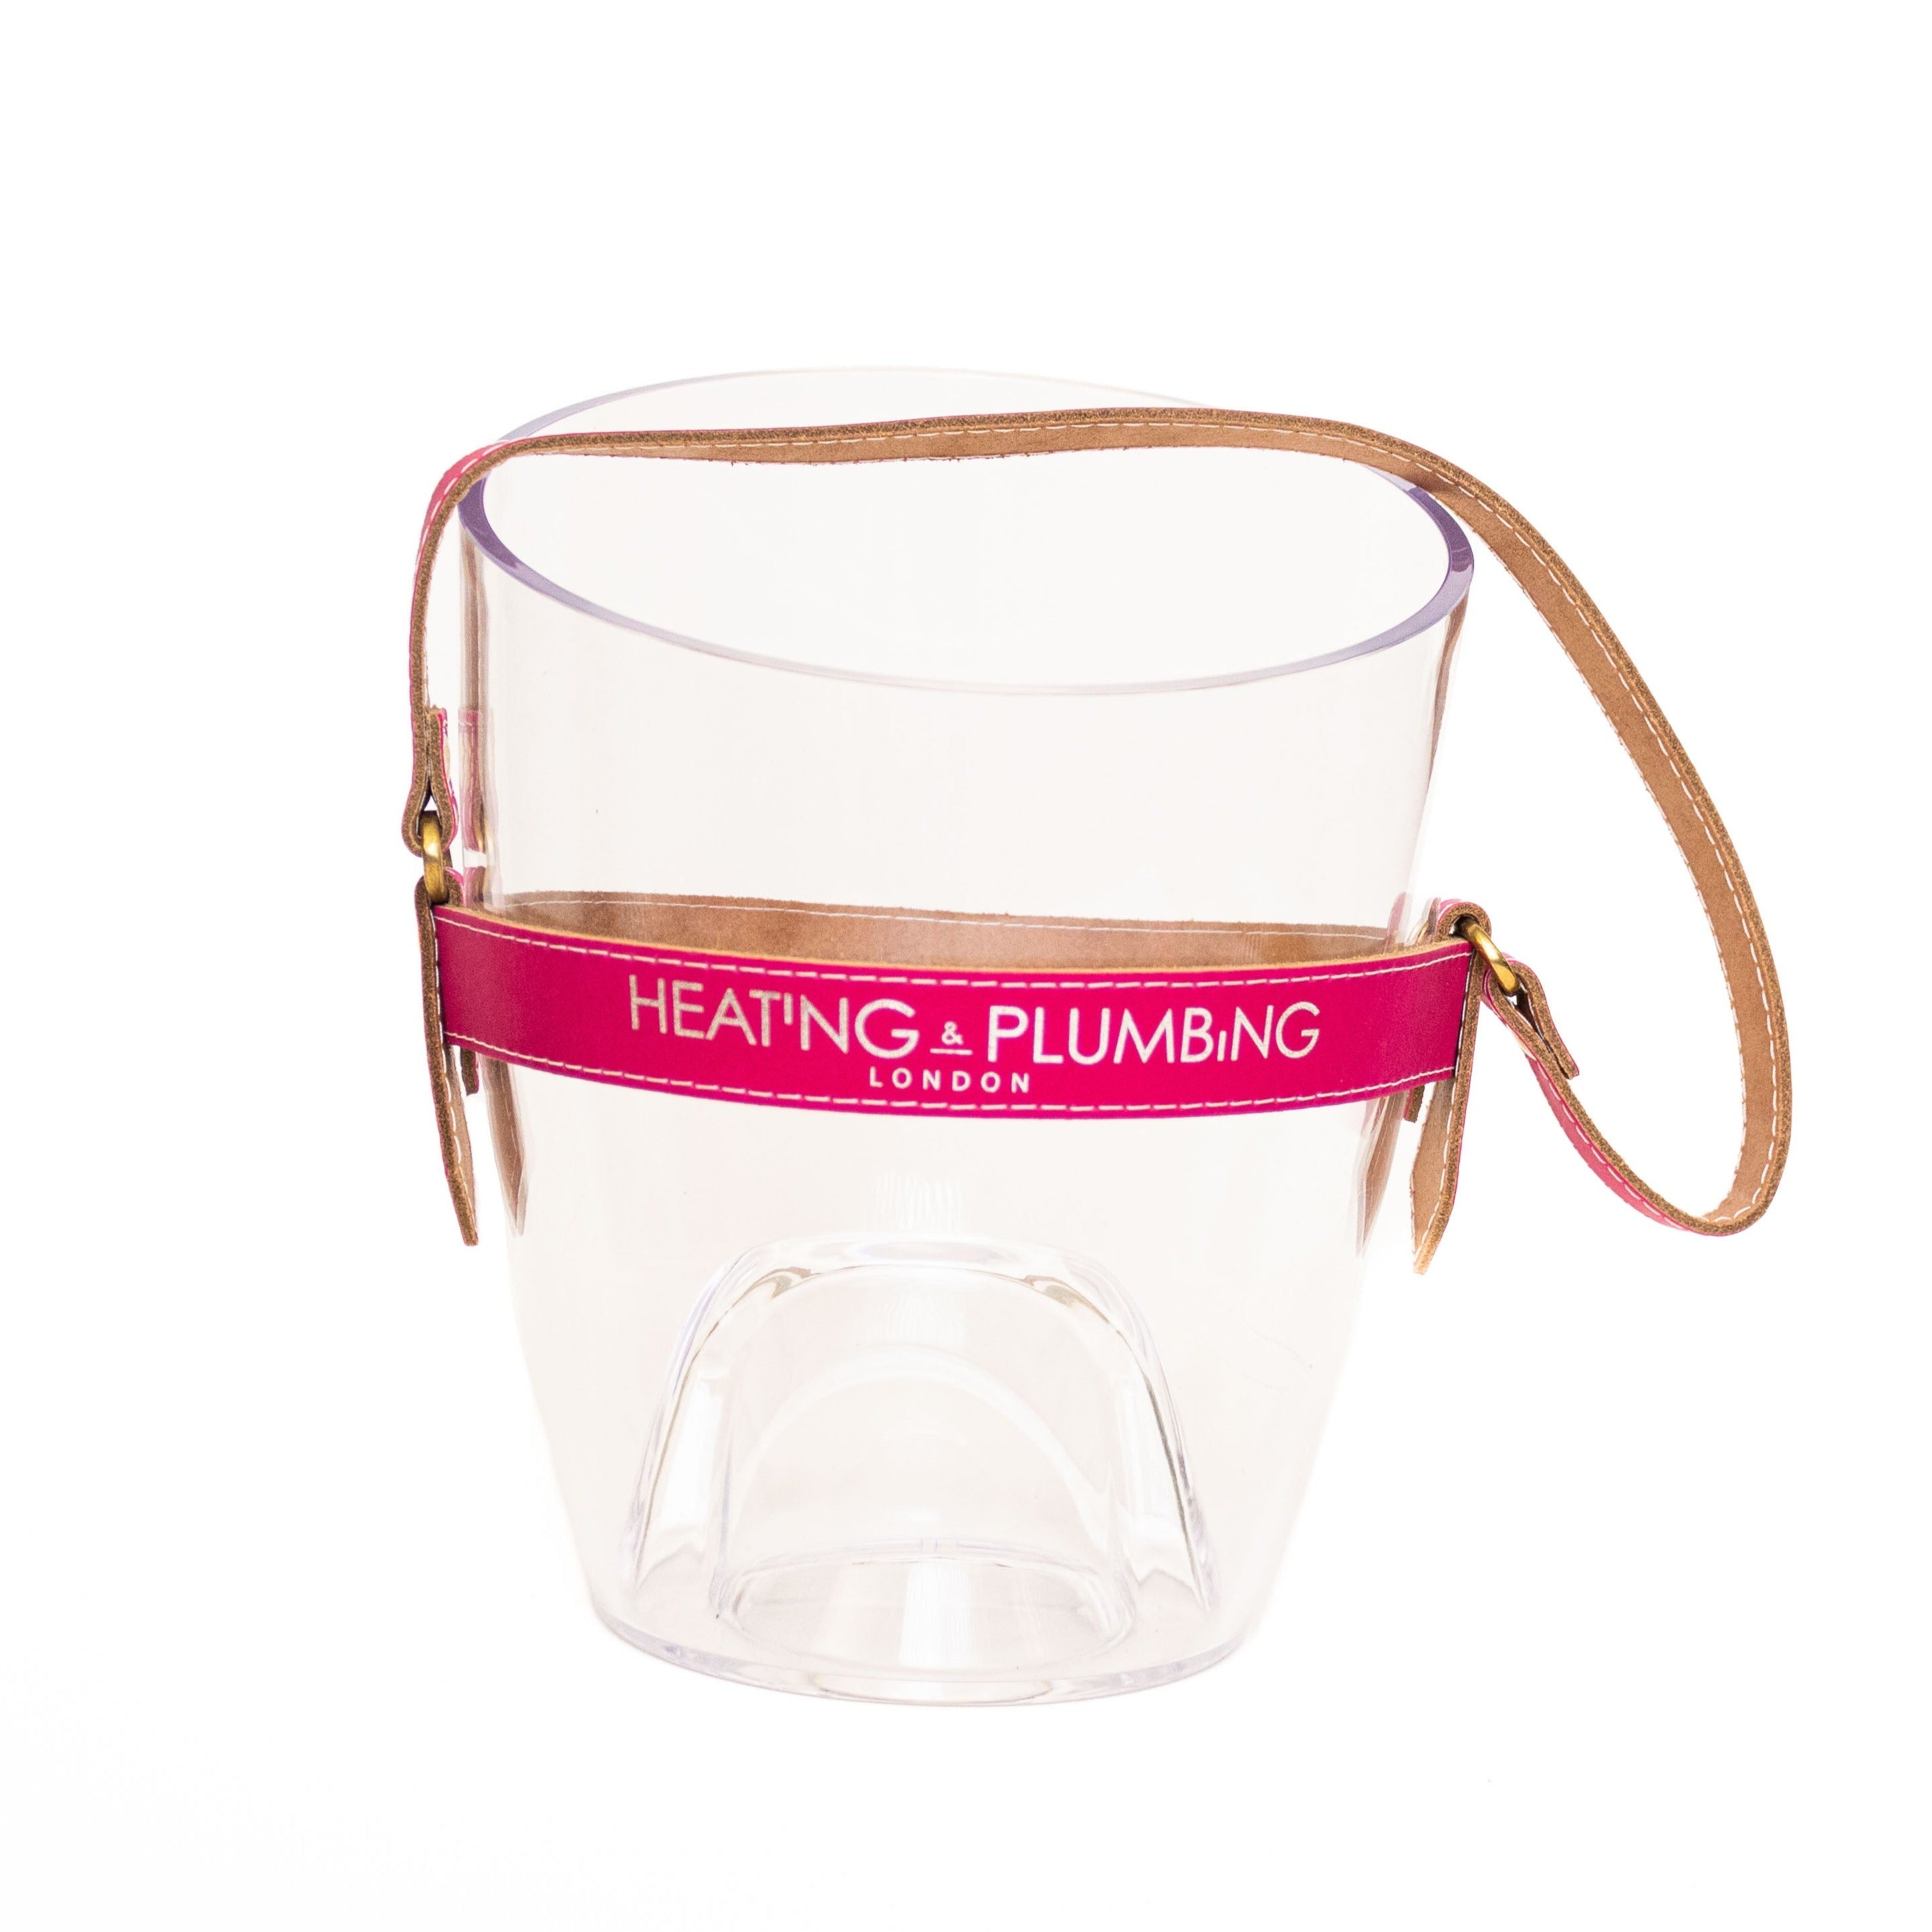 London Heating and Plumbing Champagne Bucket Electric  Pink - Decree Co. 